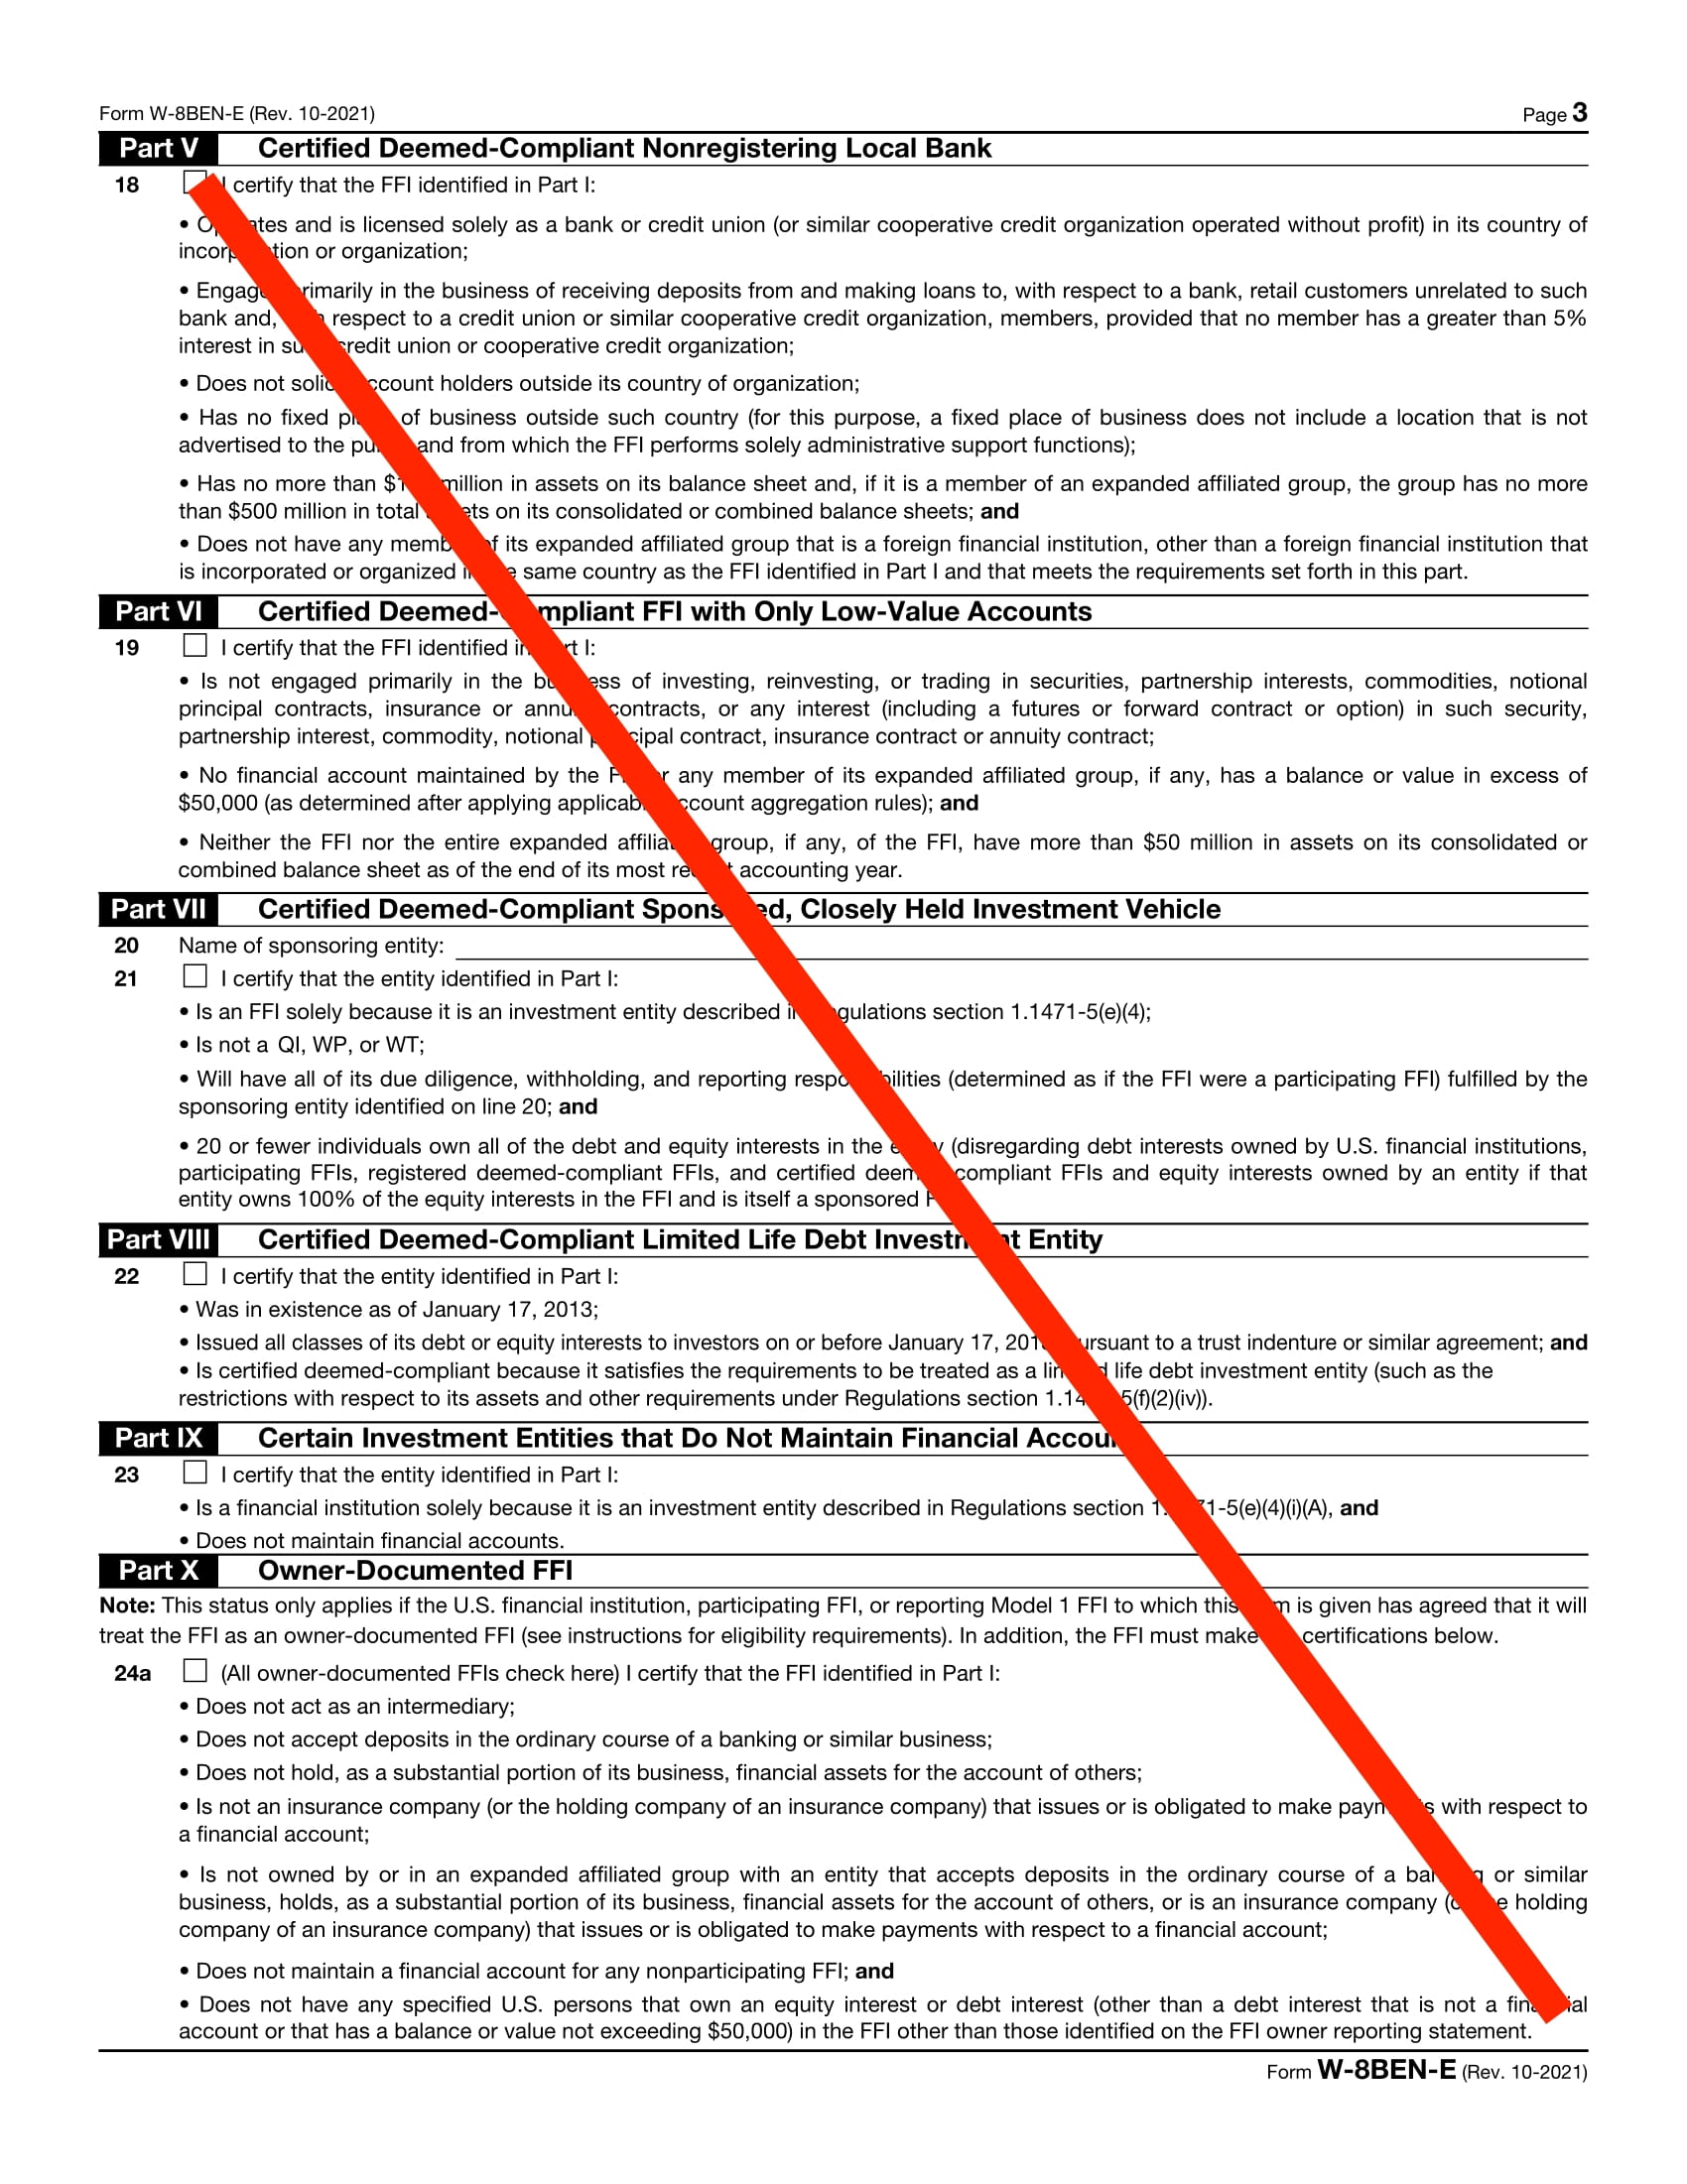 How do I fill out Form W-8BEN-E? (Page 3)